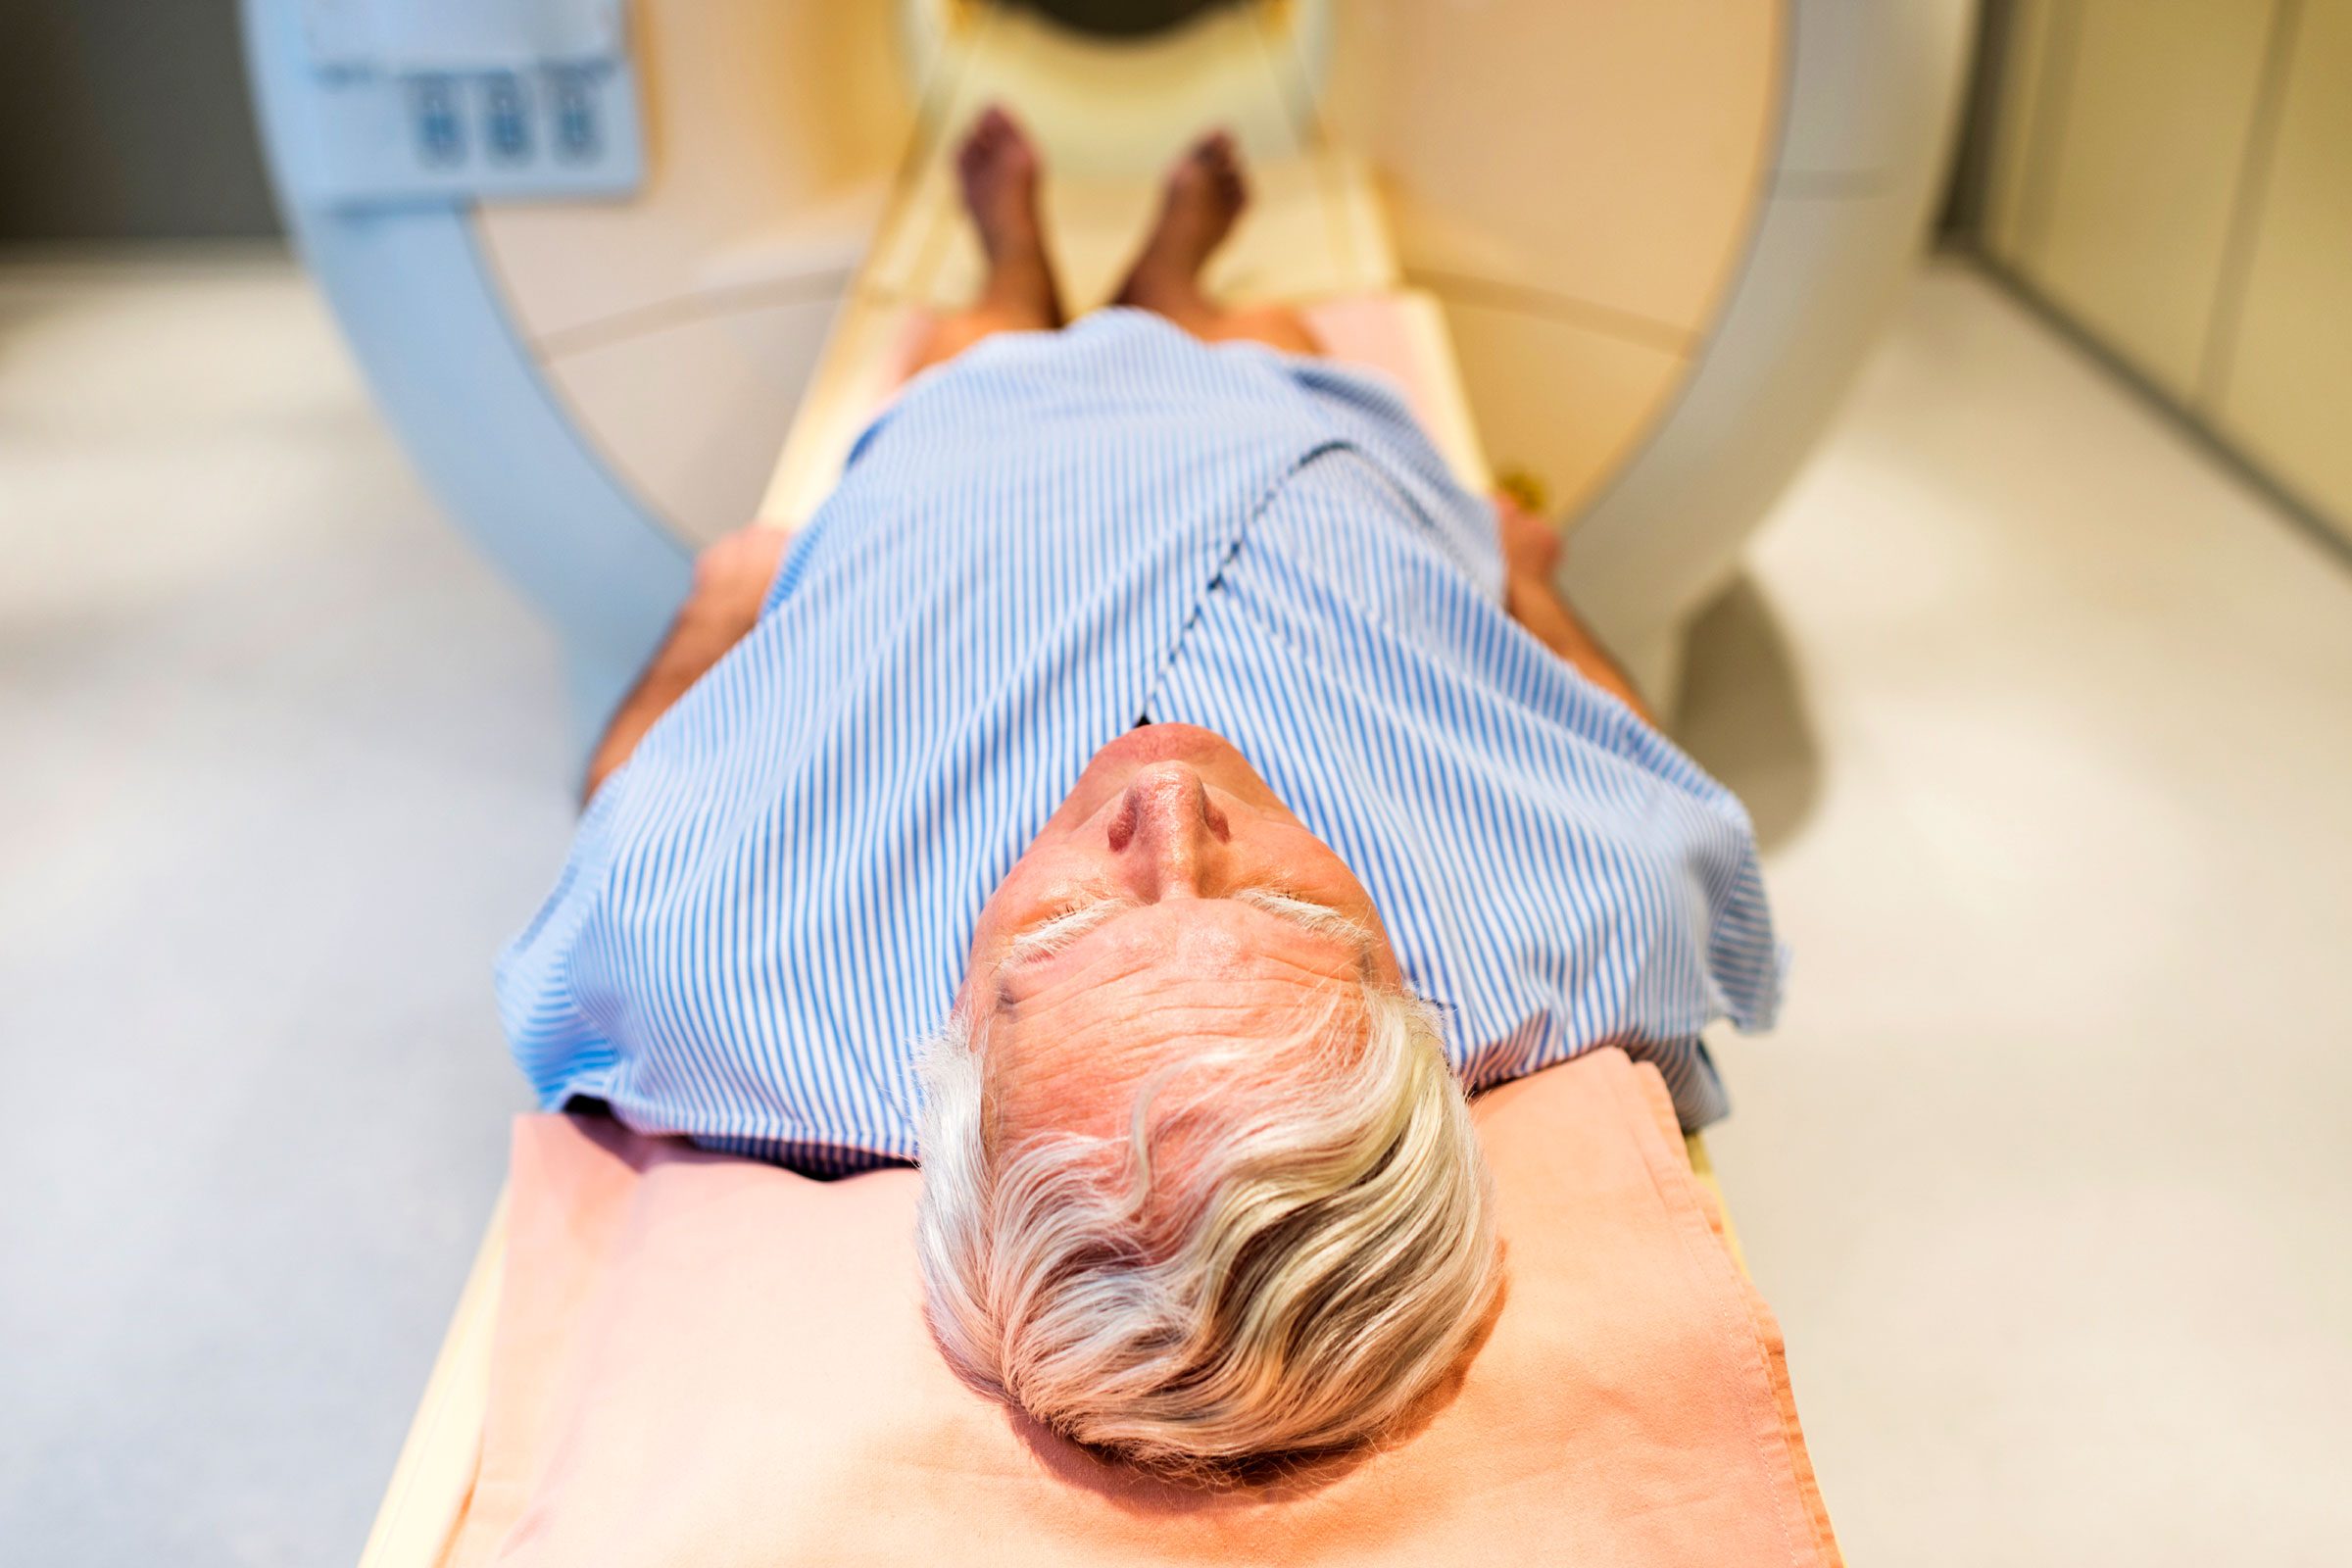 patient going into body scan machine